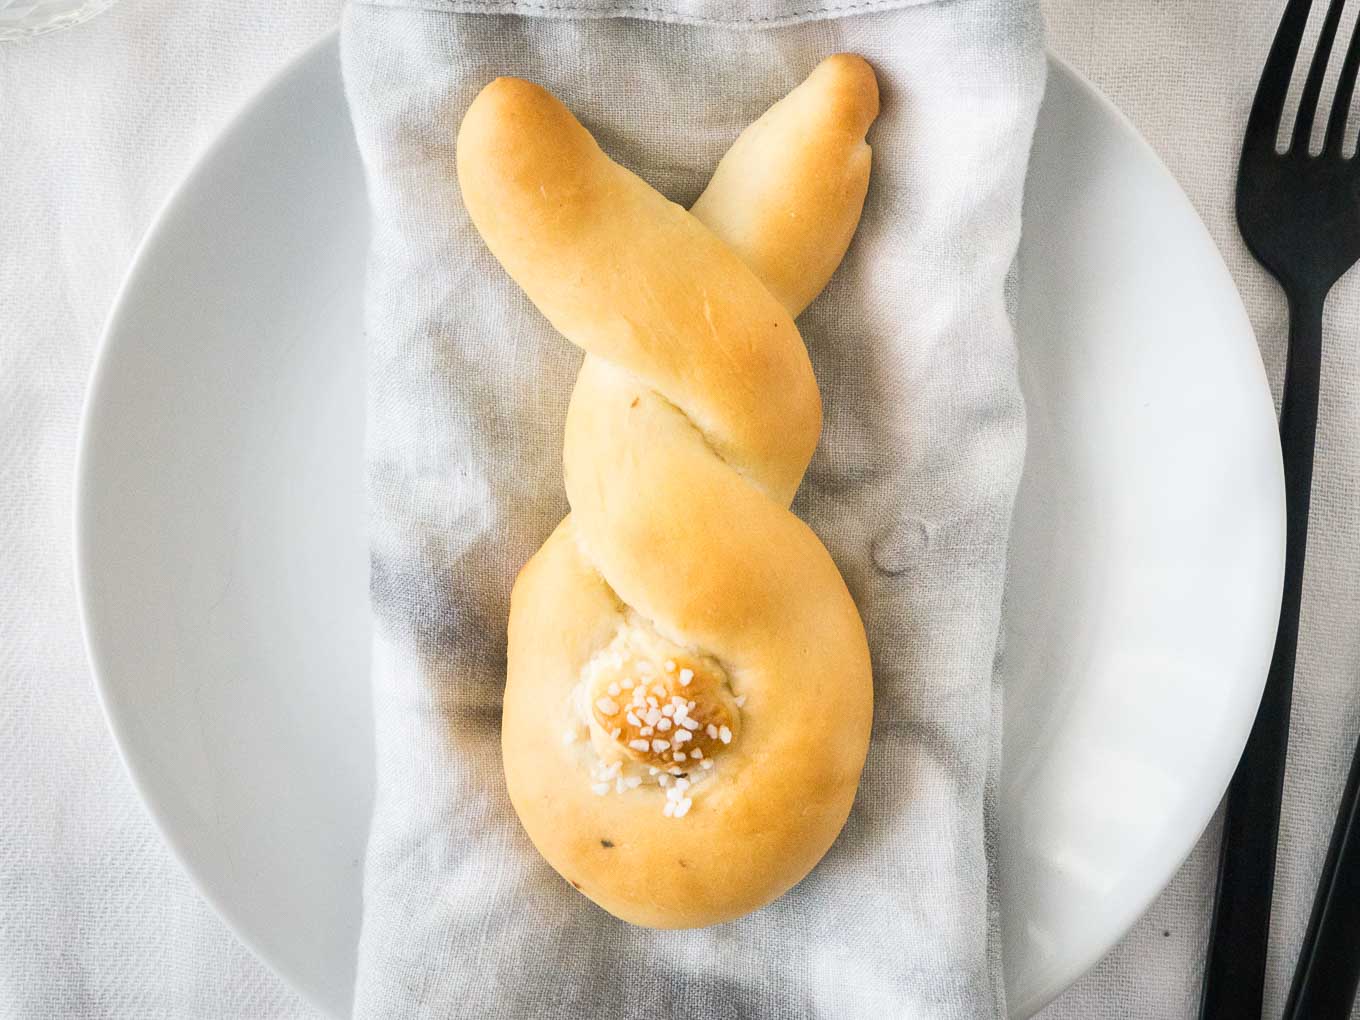 Bread shaped like a bunny, with a cottontail from dough on a grey dishtowel on a white plate.